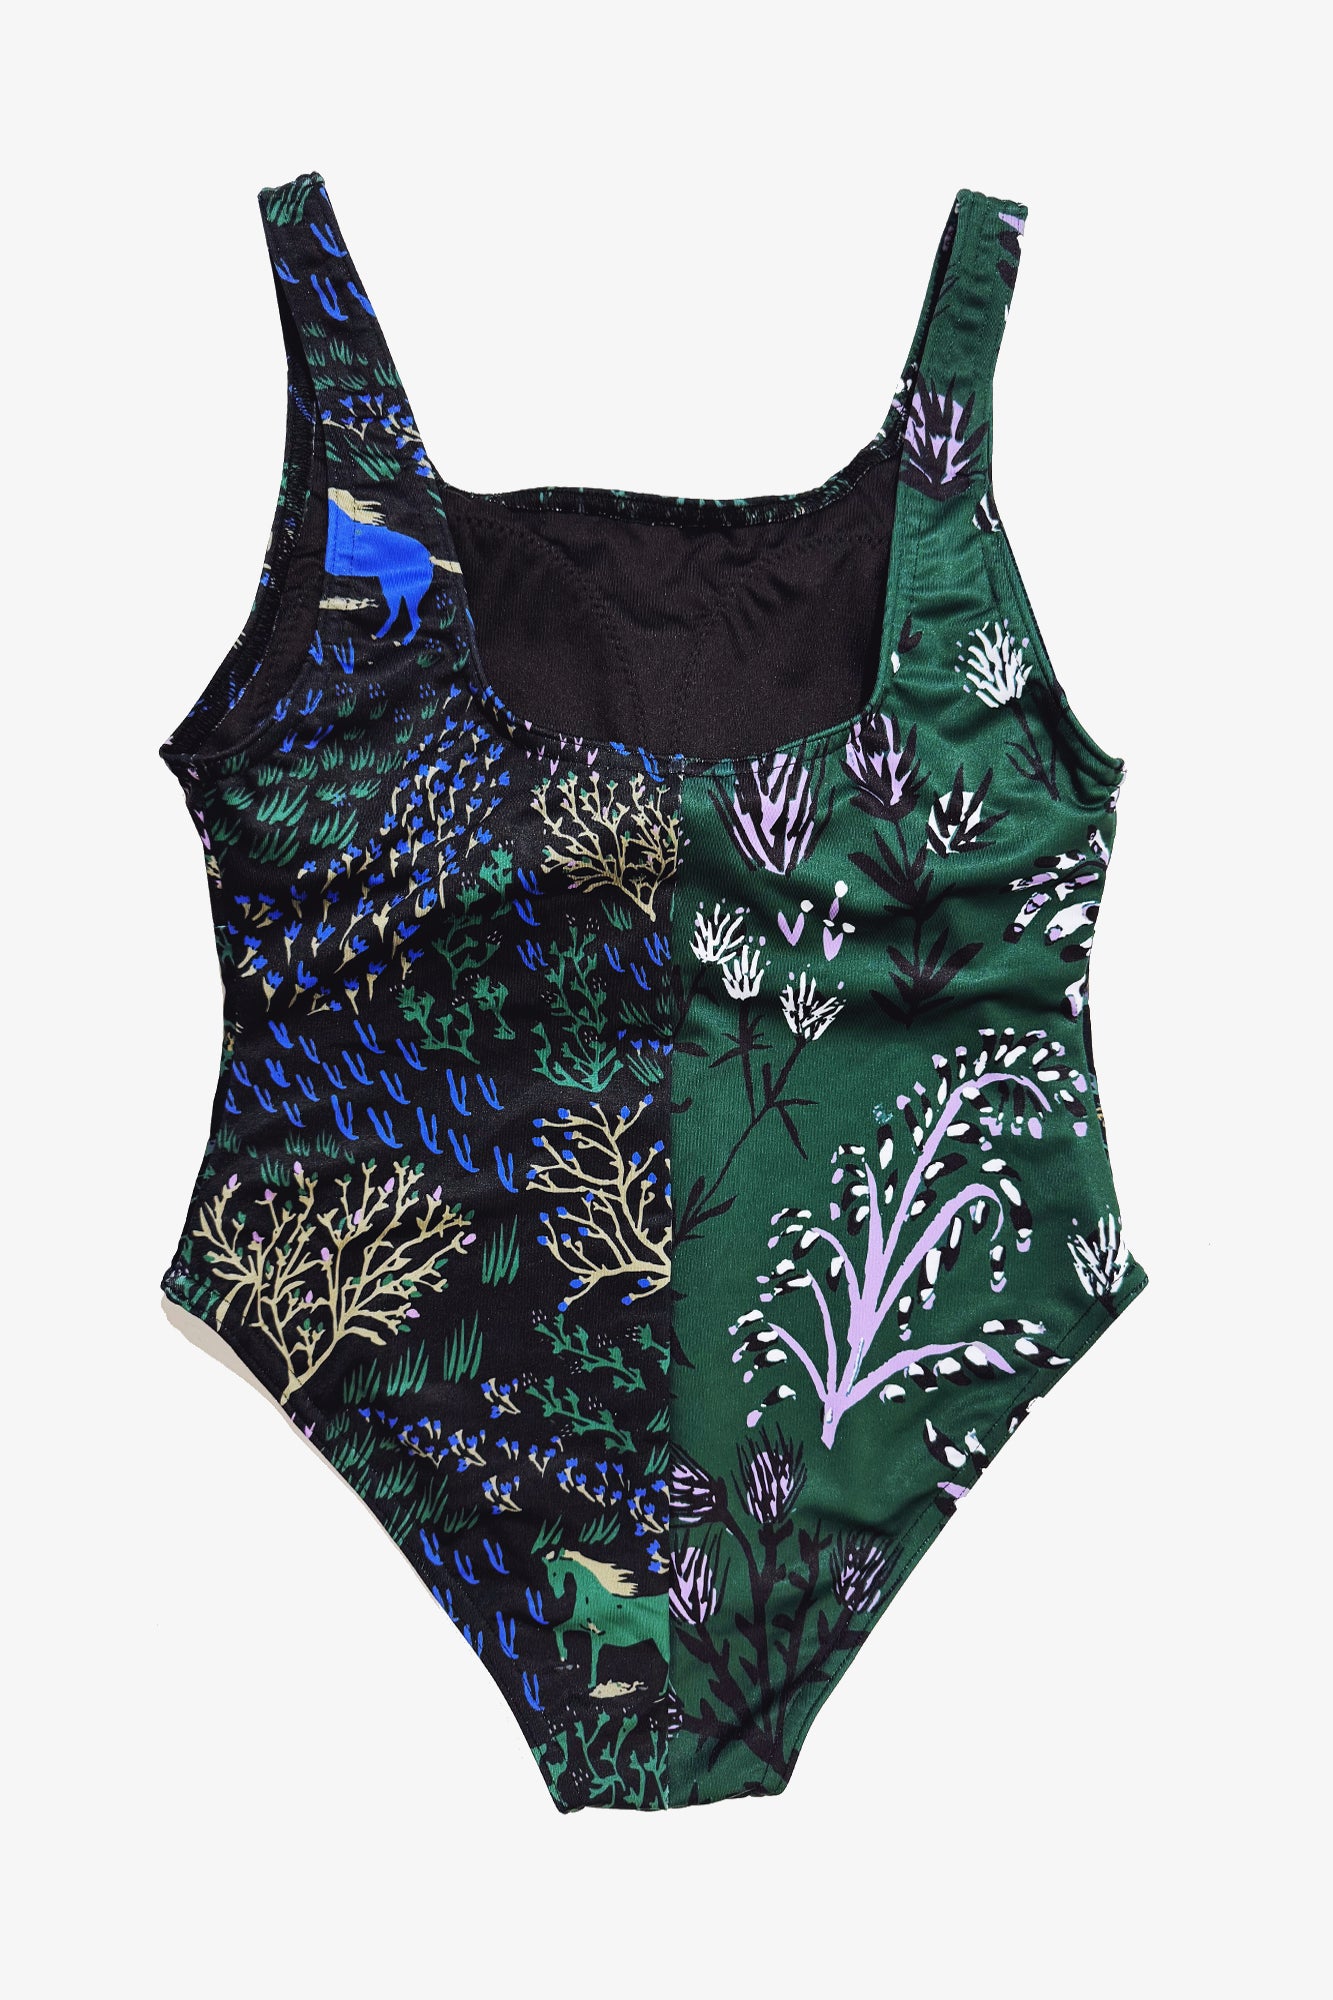 Patchwork Chartreuse Berry/Horses/Emerald Thistle One Piece Swimsuit